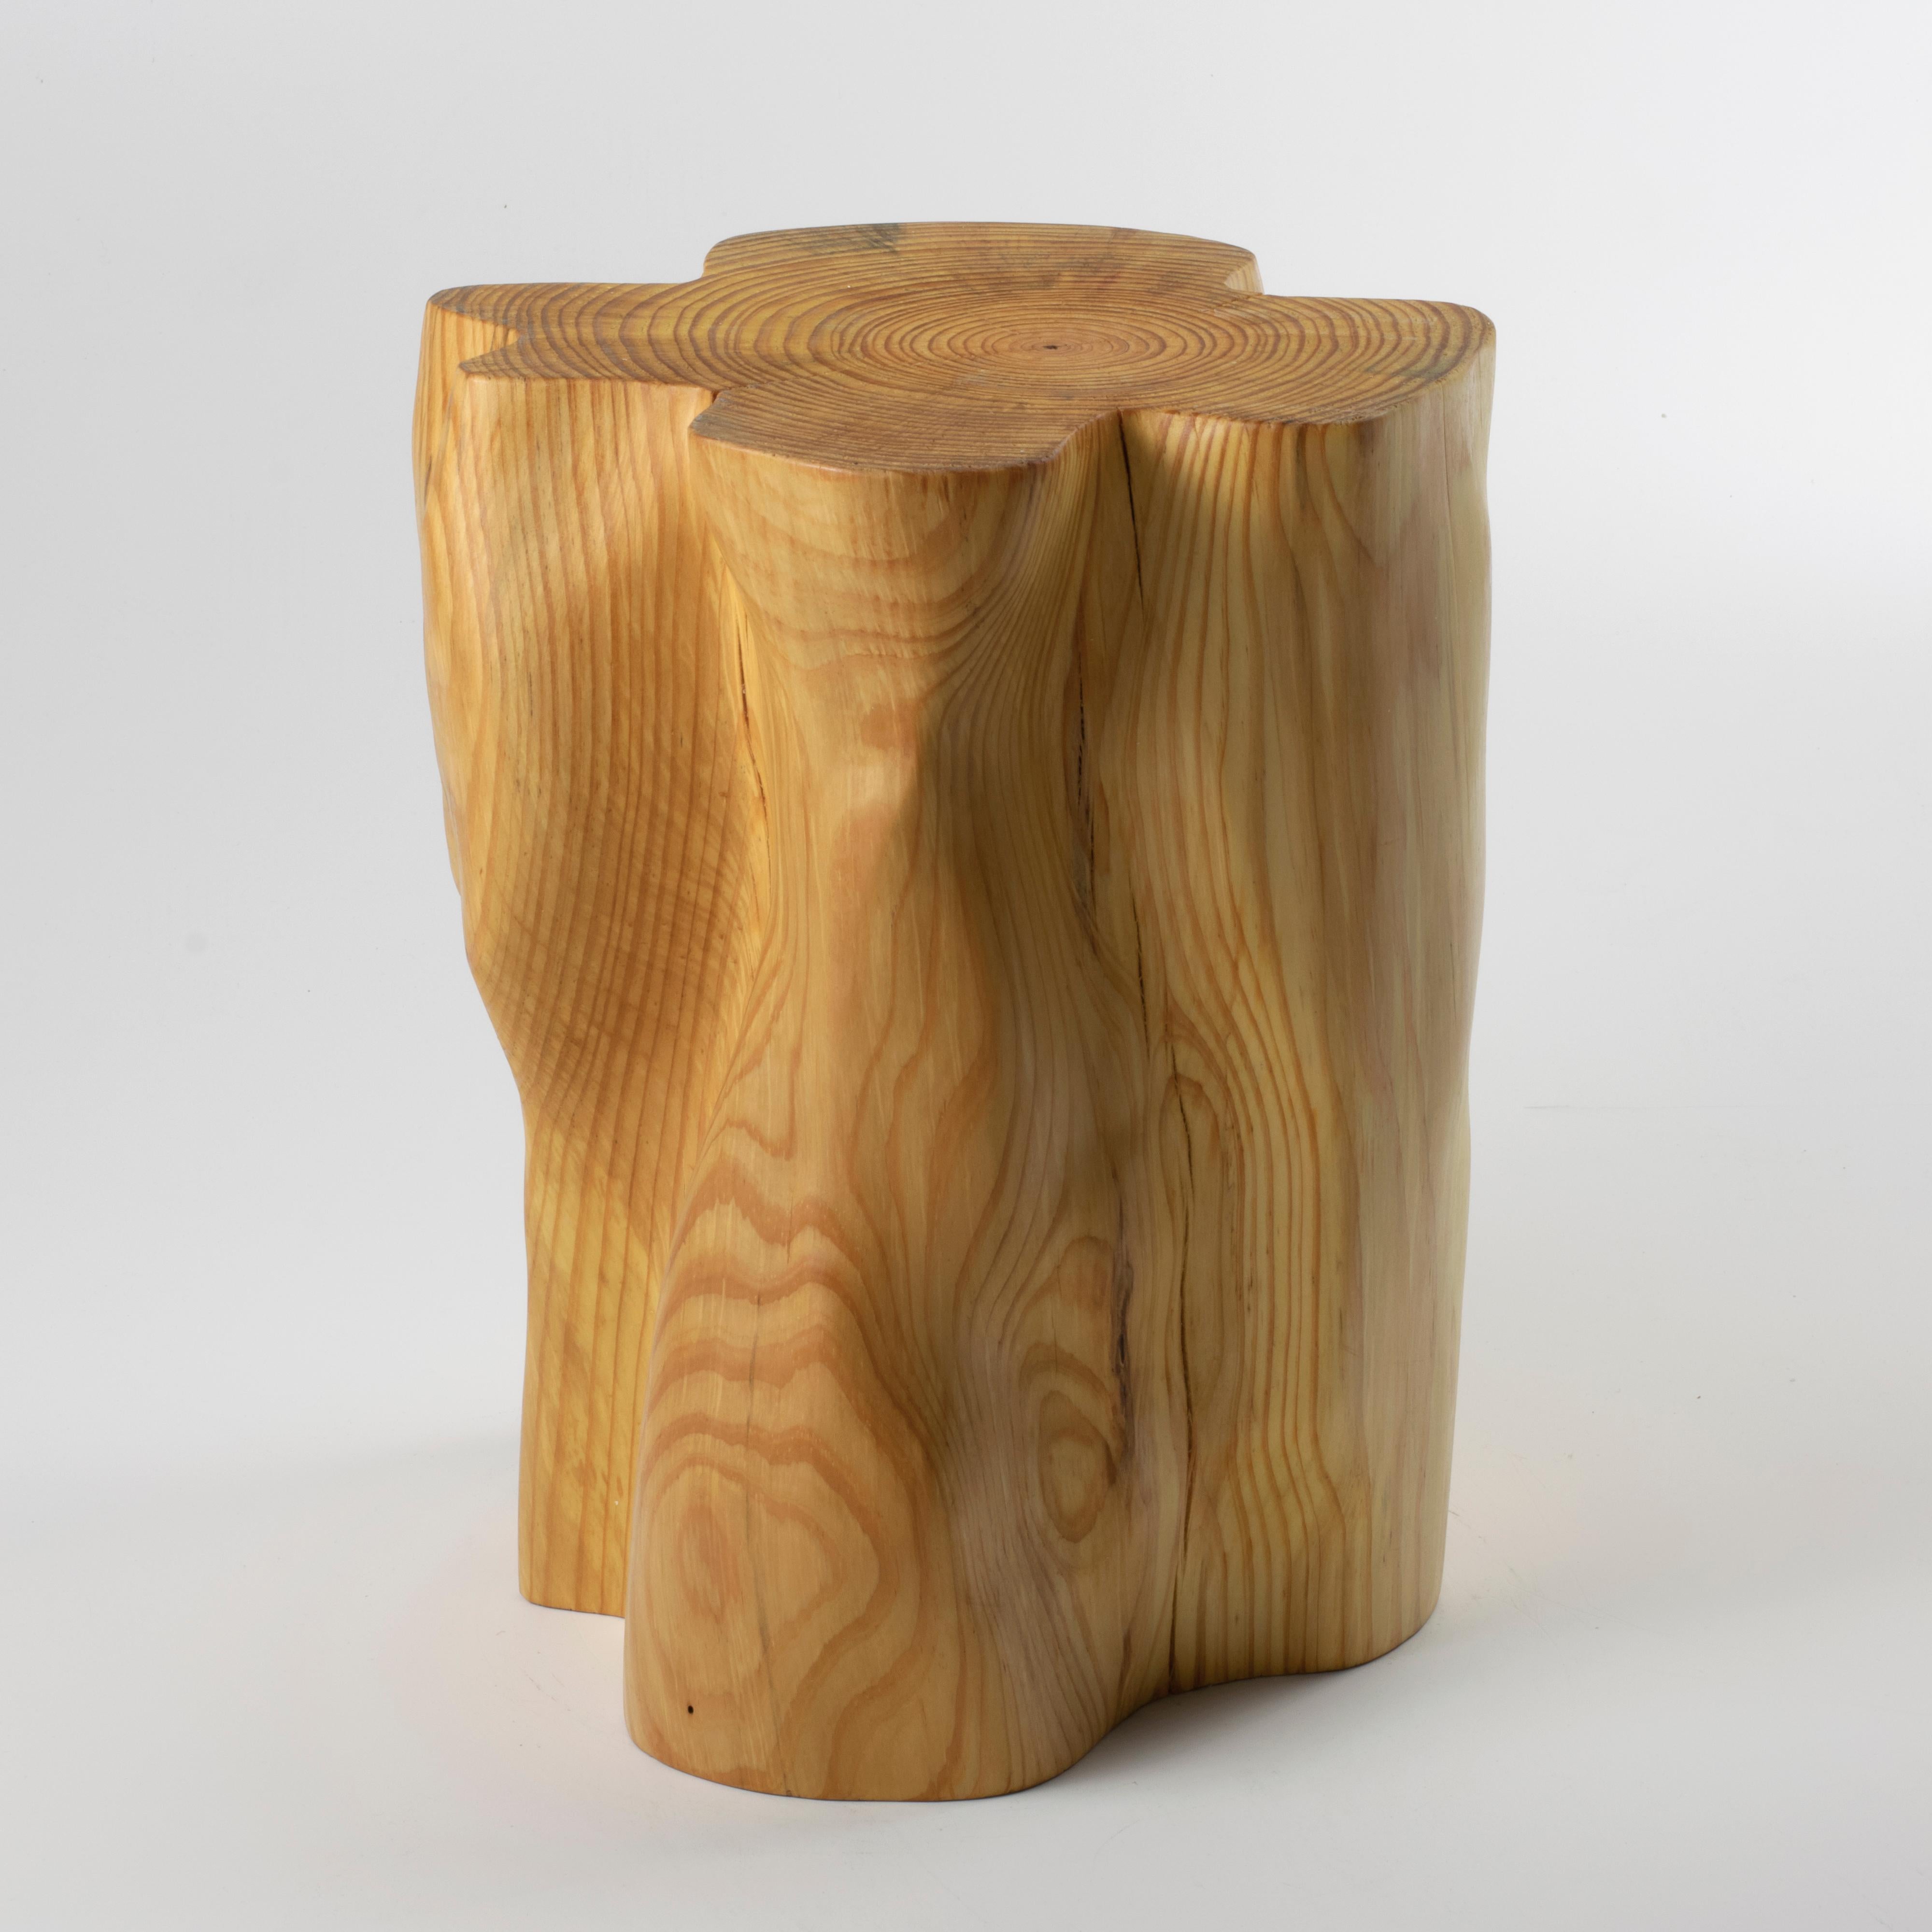 Machine-Made Bark Scale Stool #I by Timbur, Represented by Tuleste Factory For Sale